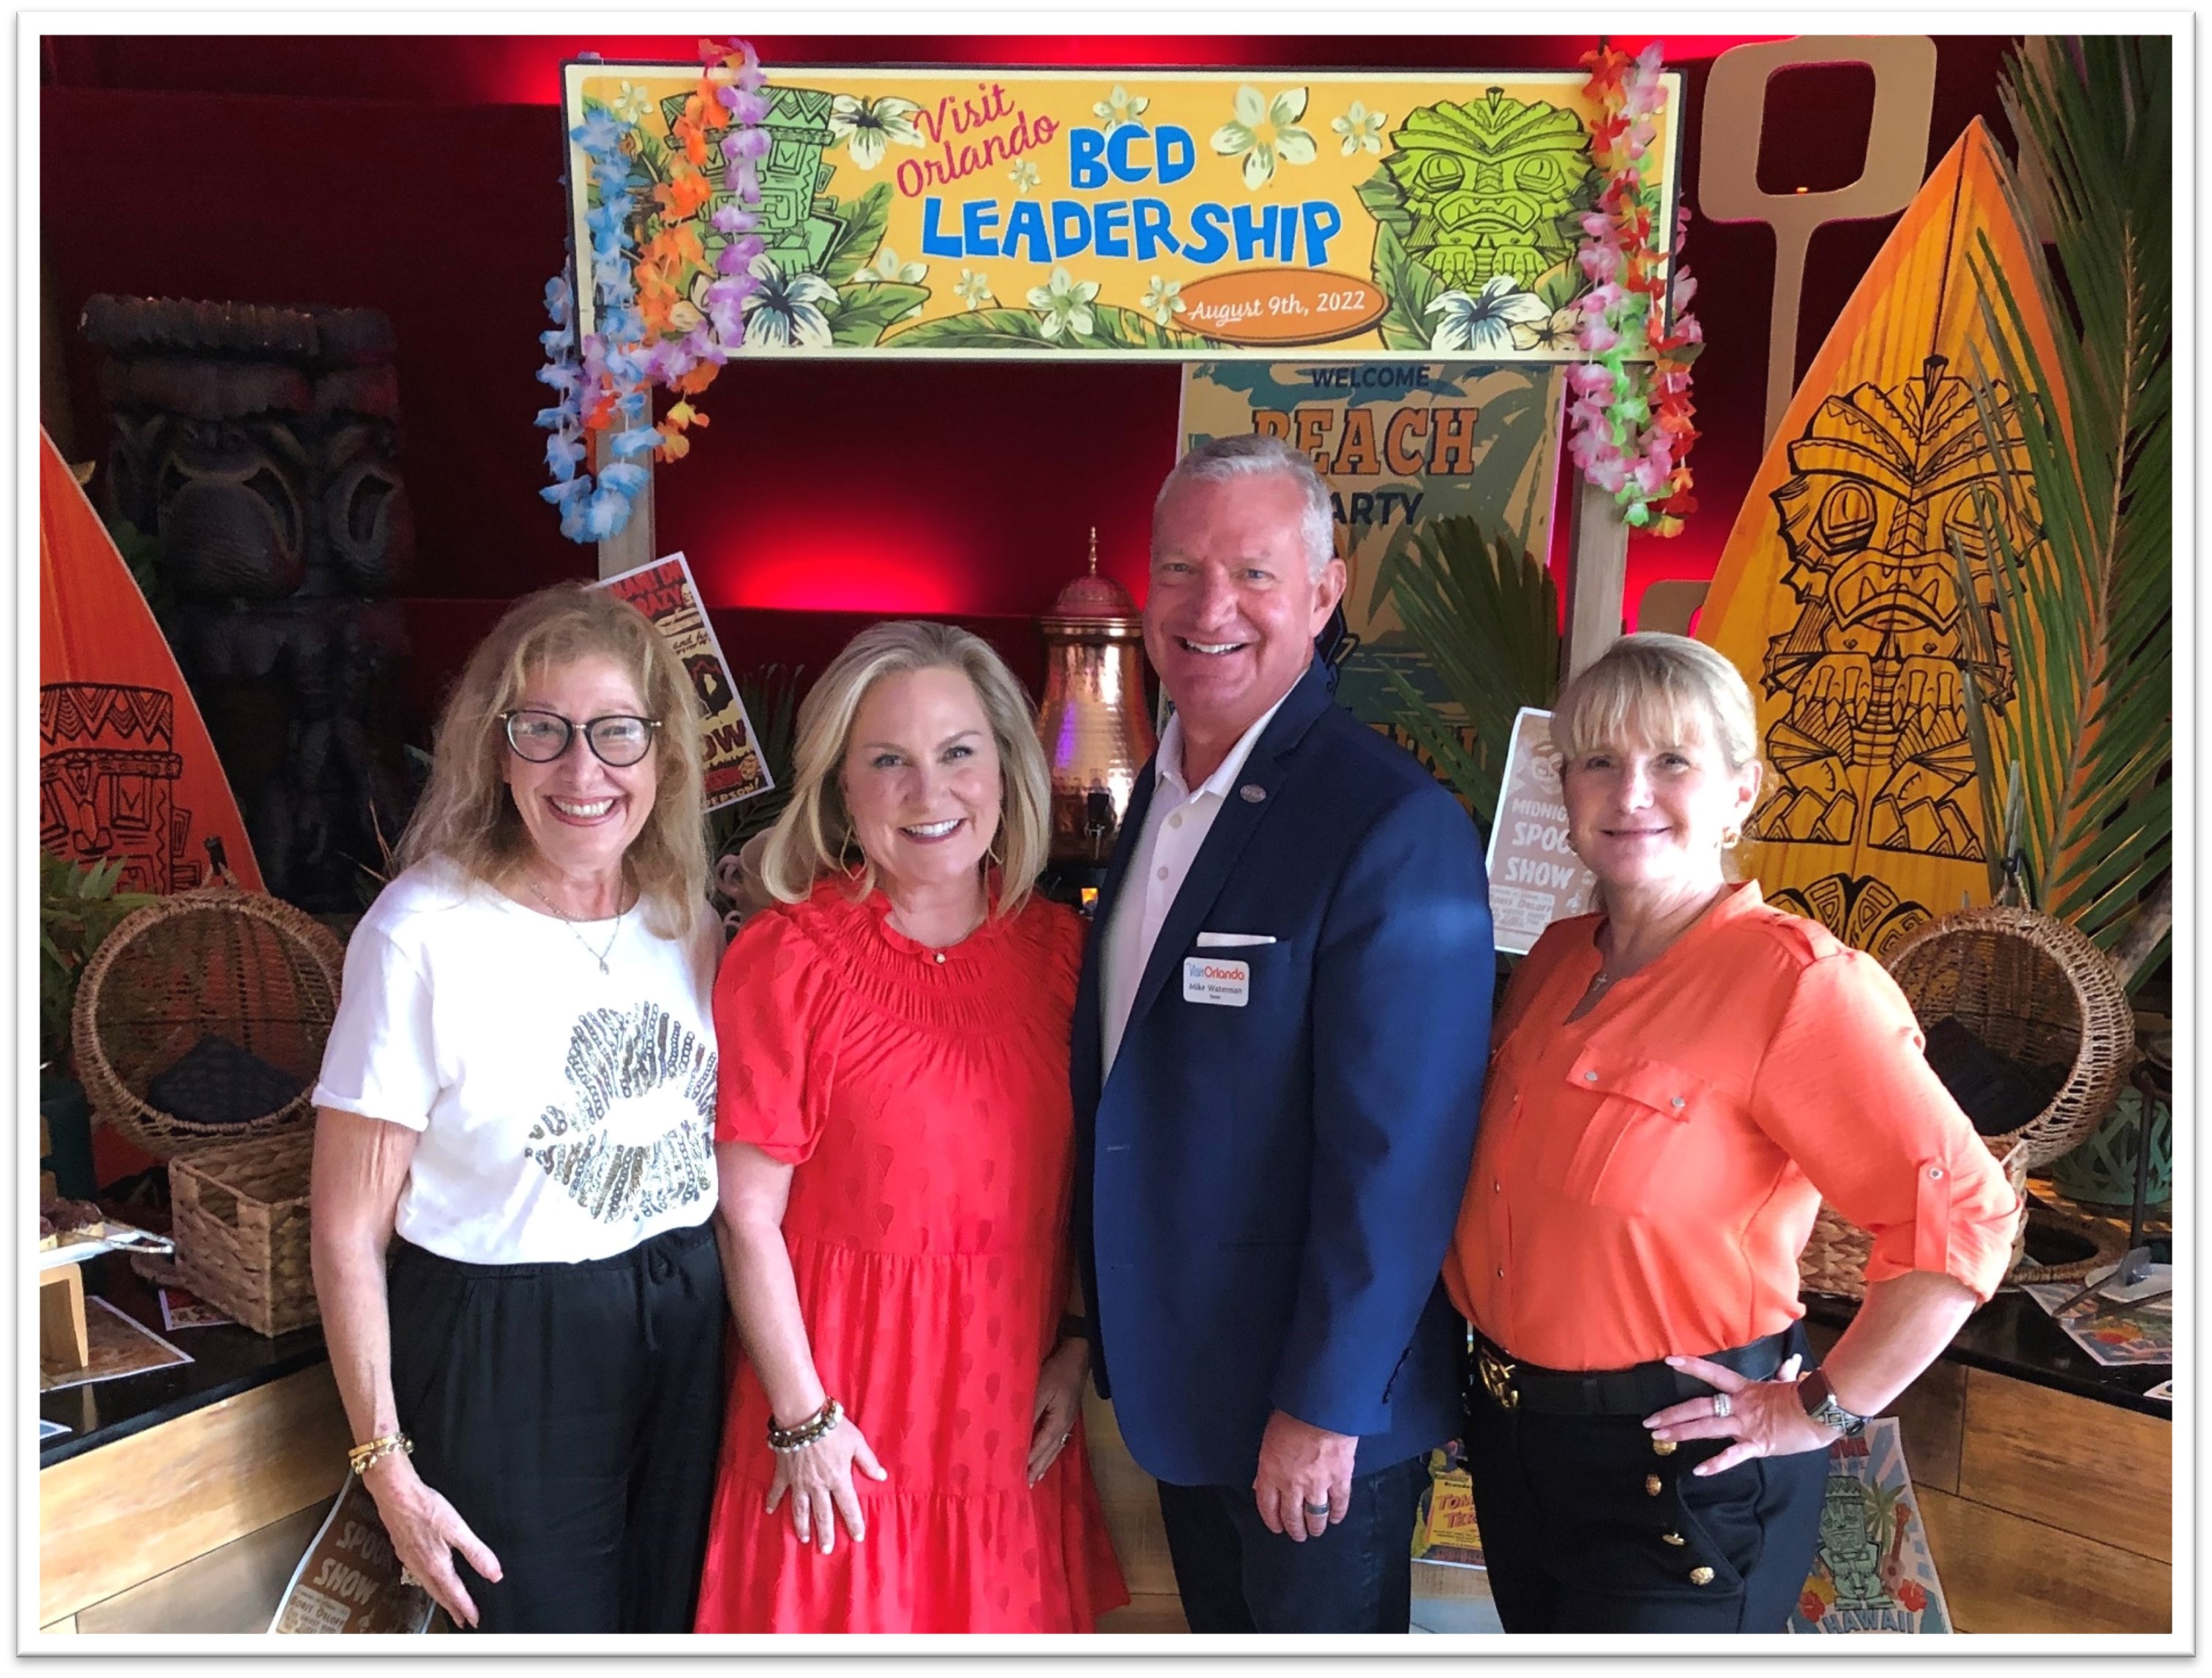 Casandra Matej, president and CEO at Visit Orlando, pictured with Visit Orlando team members while hosting the BCD leadership team.